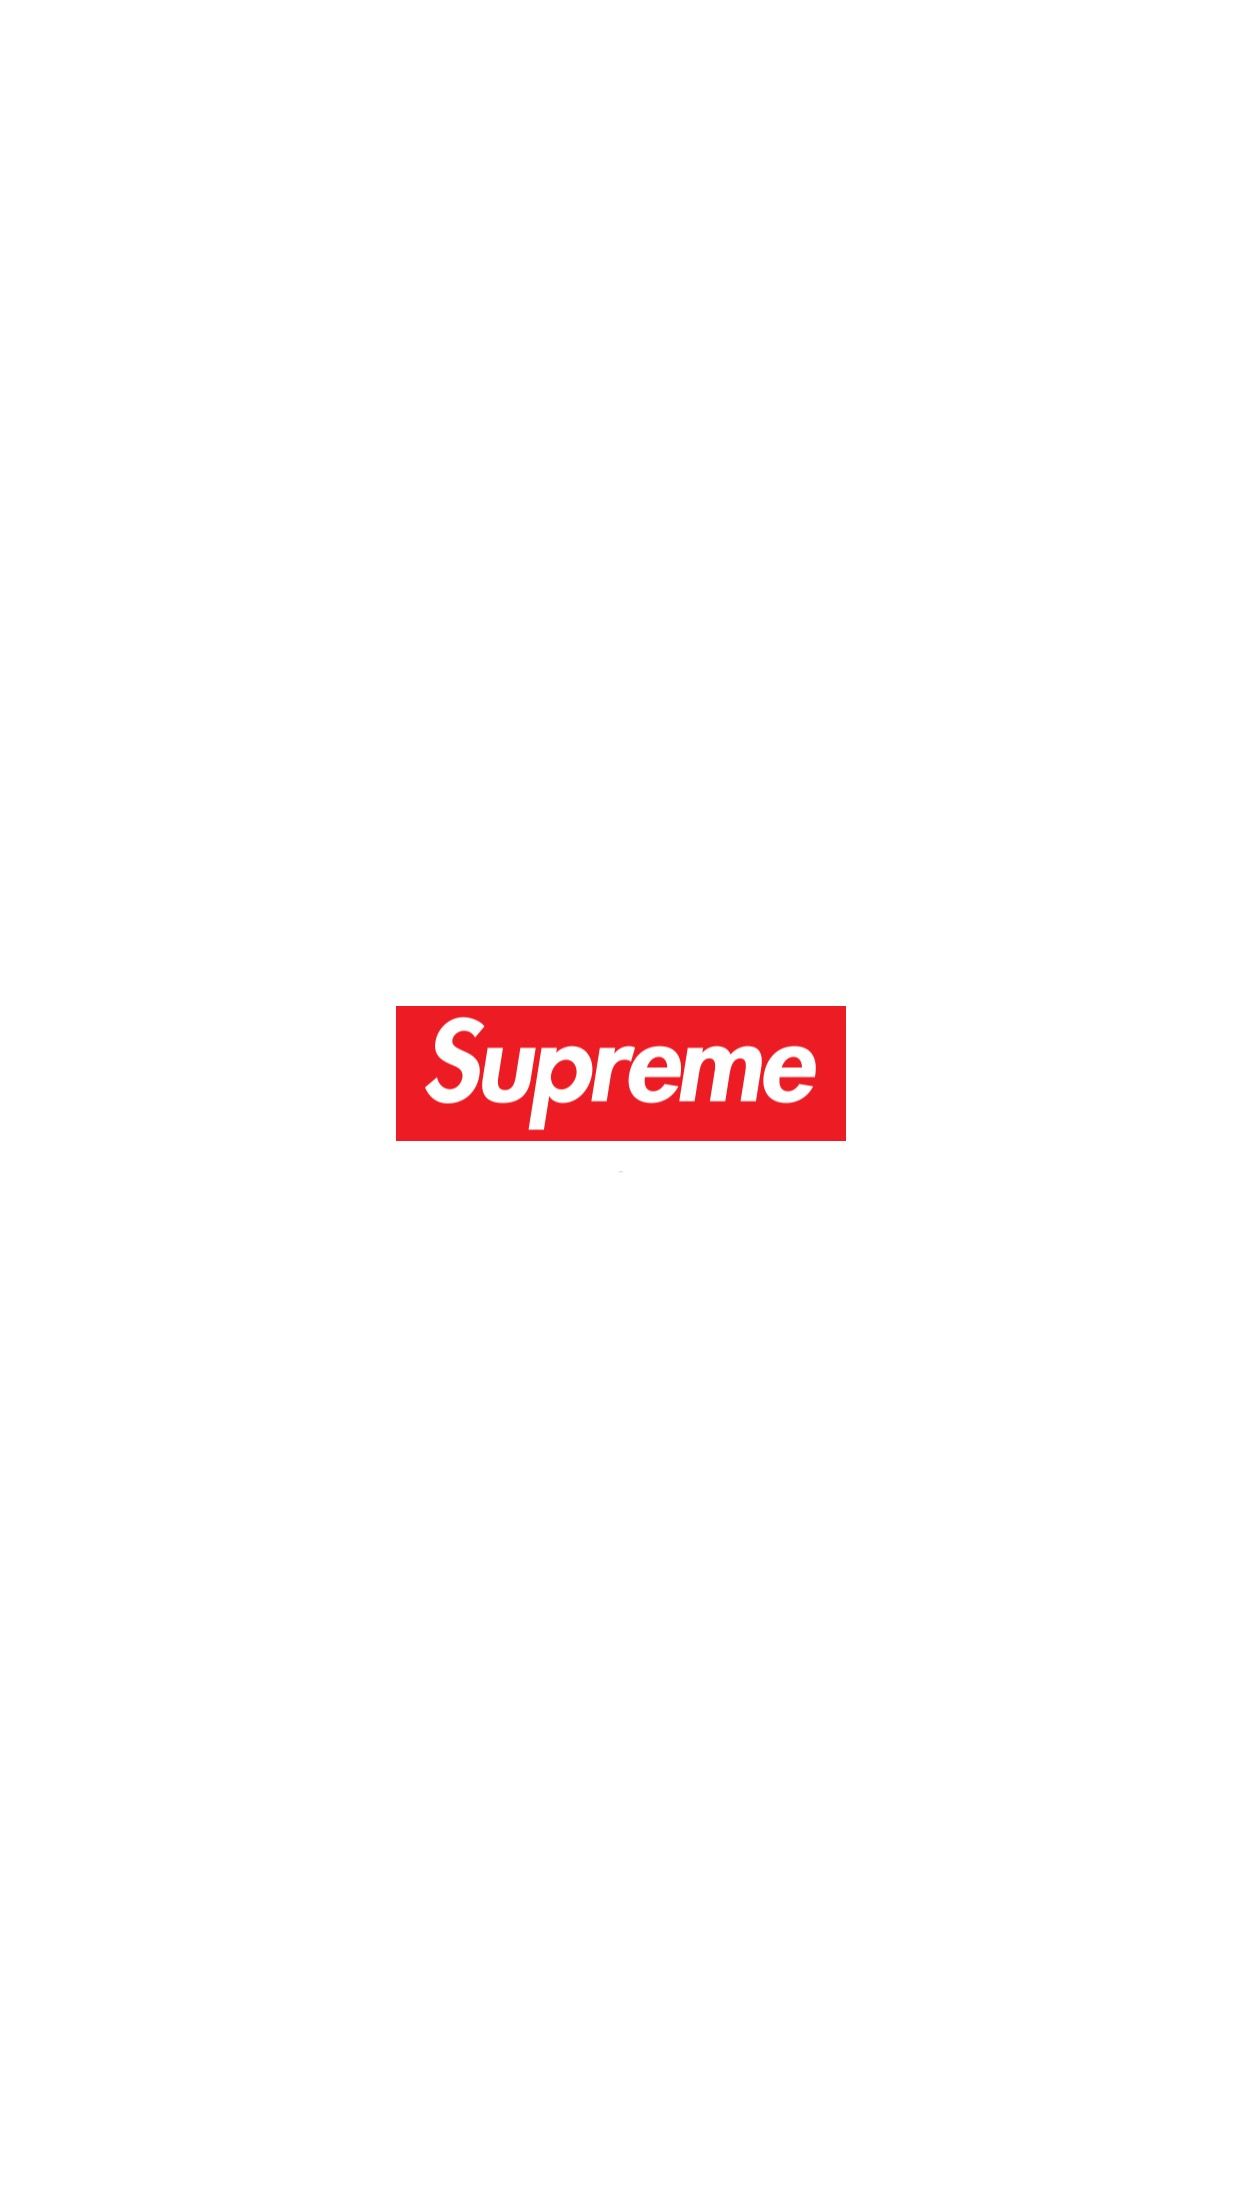 Supreme white iphone wallpapers